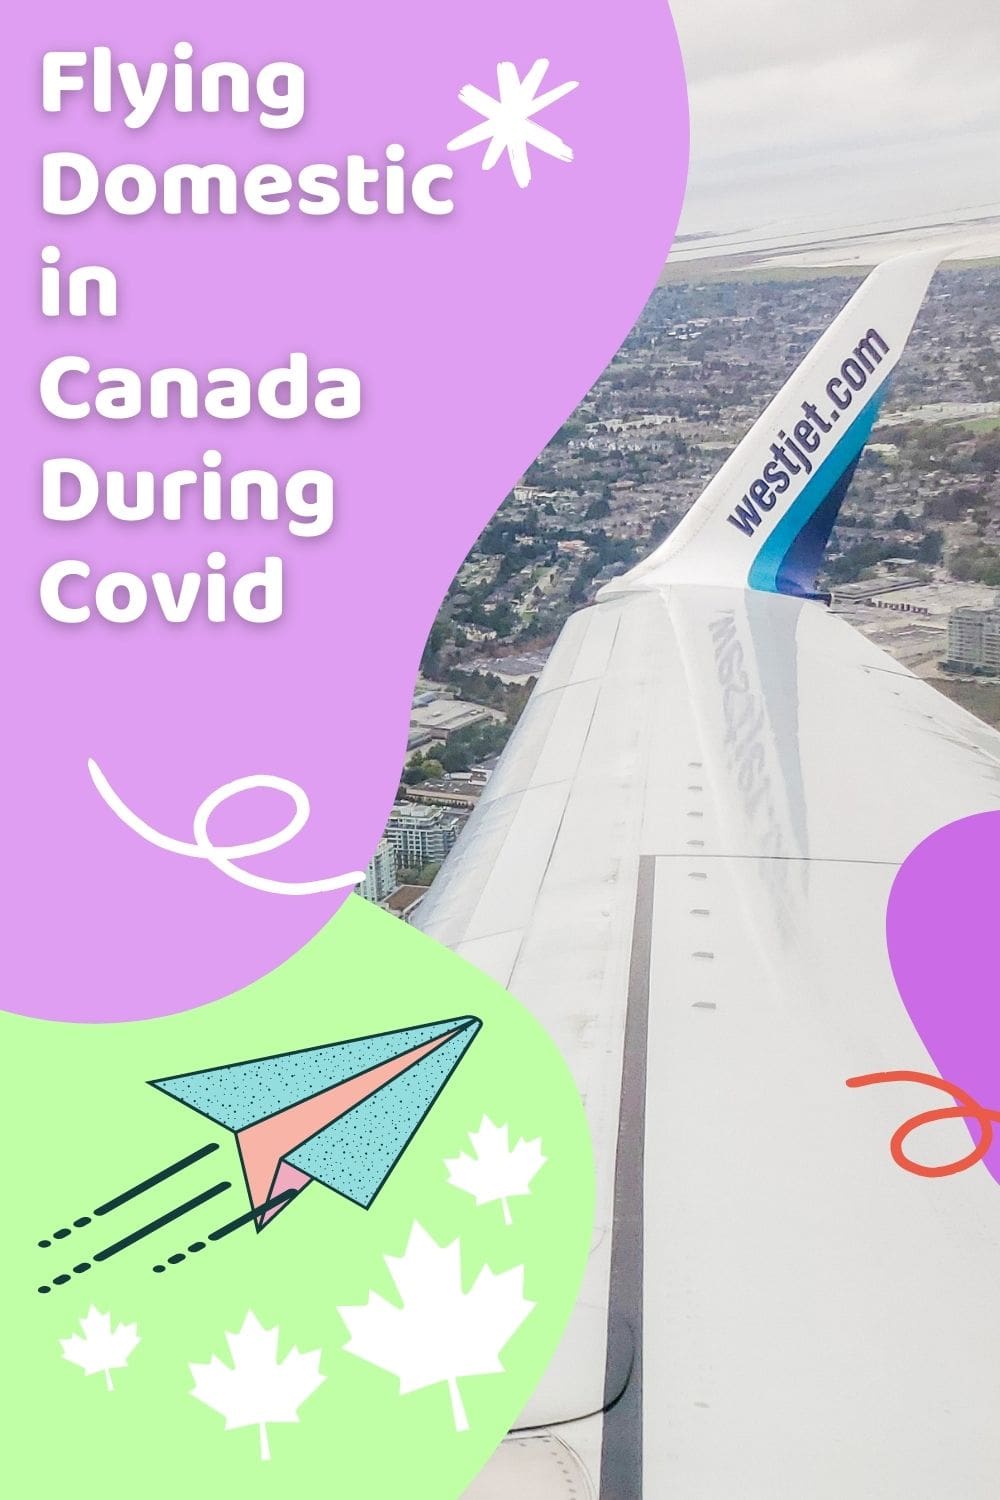 Flying Domestic in Canada during Covid